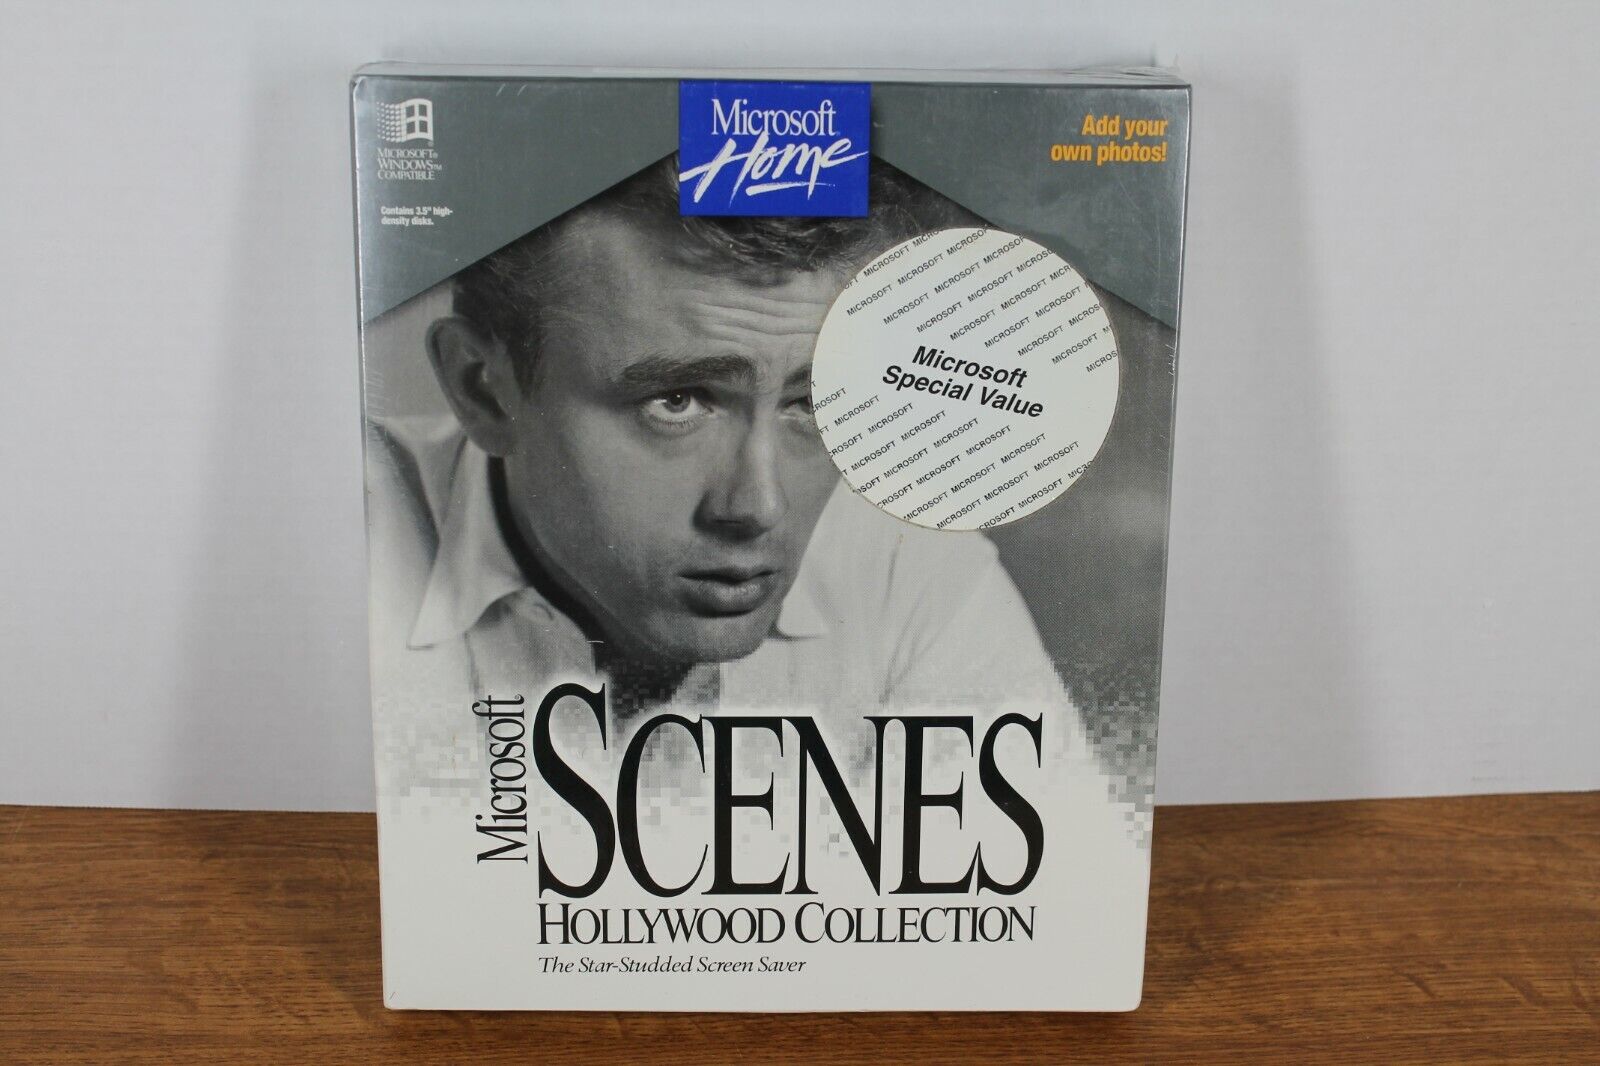 Microsoft - Scenes - Hollywood Collection - Star-Studded Screen Saver - NEW RARE